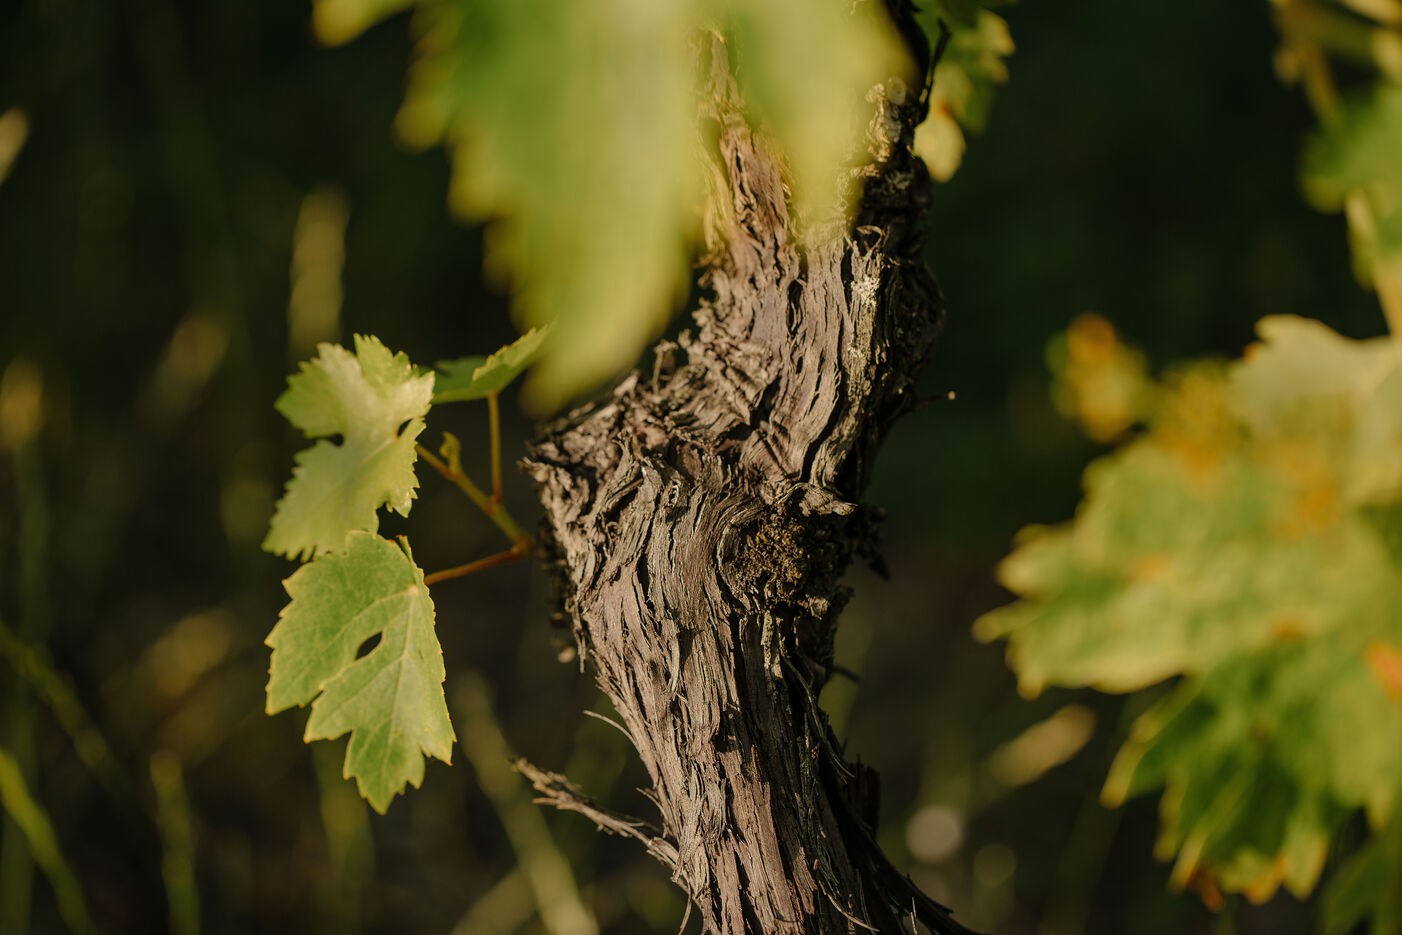 A nature photo of a wine trunk with few leaves